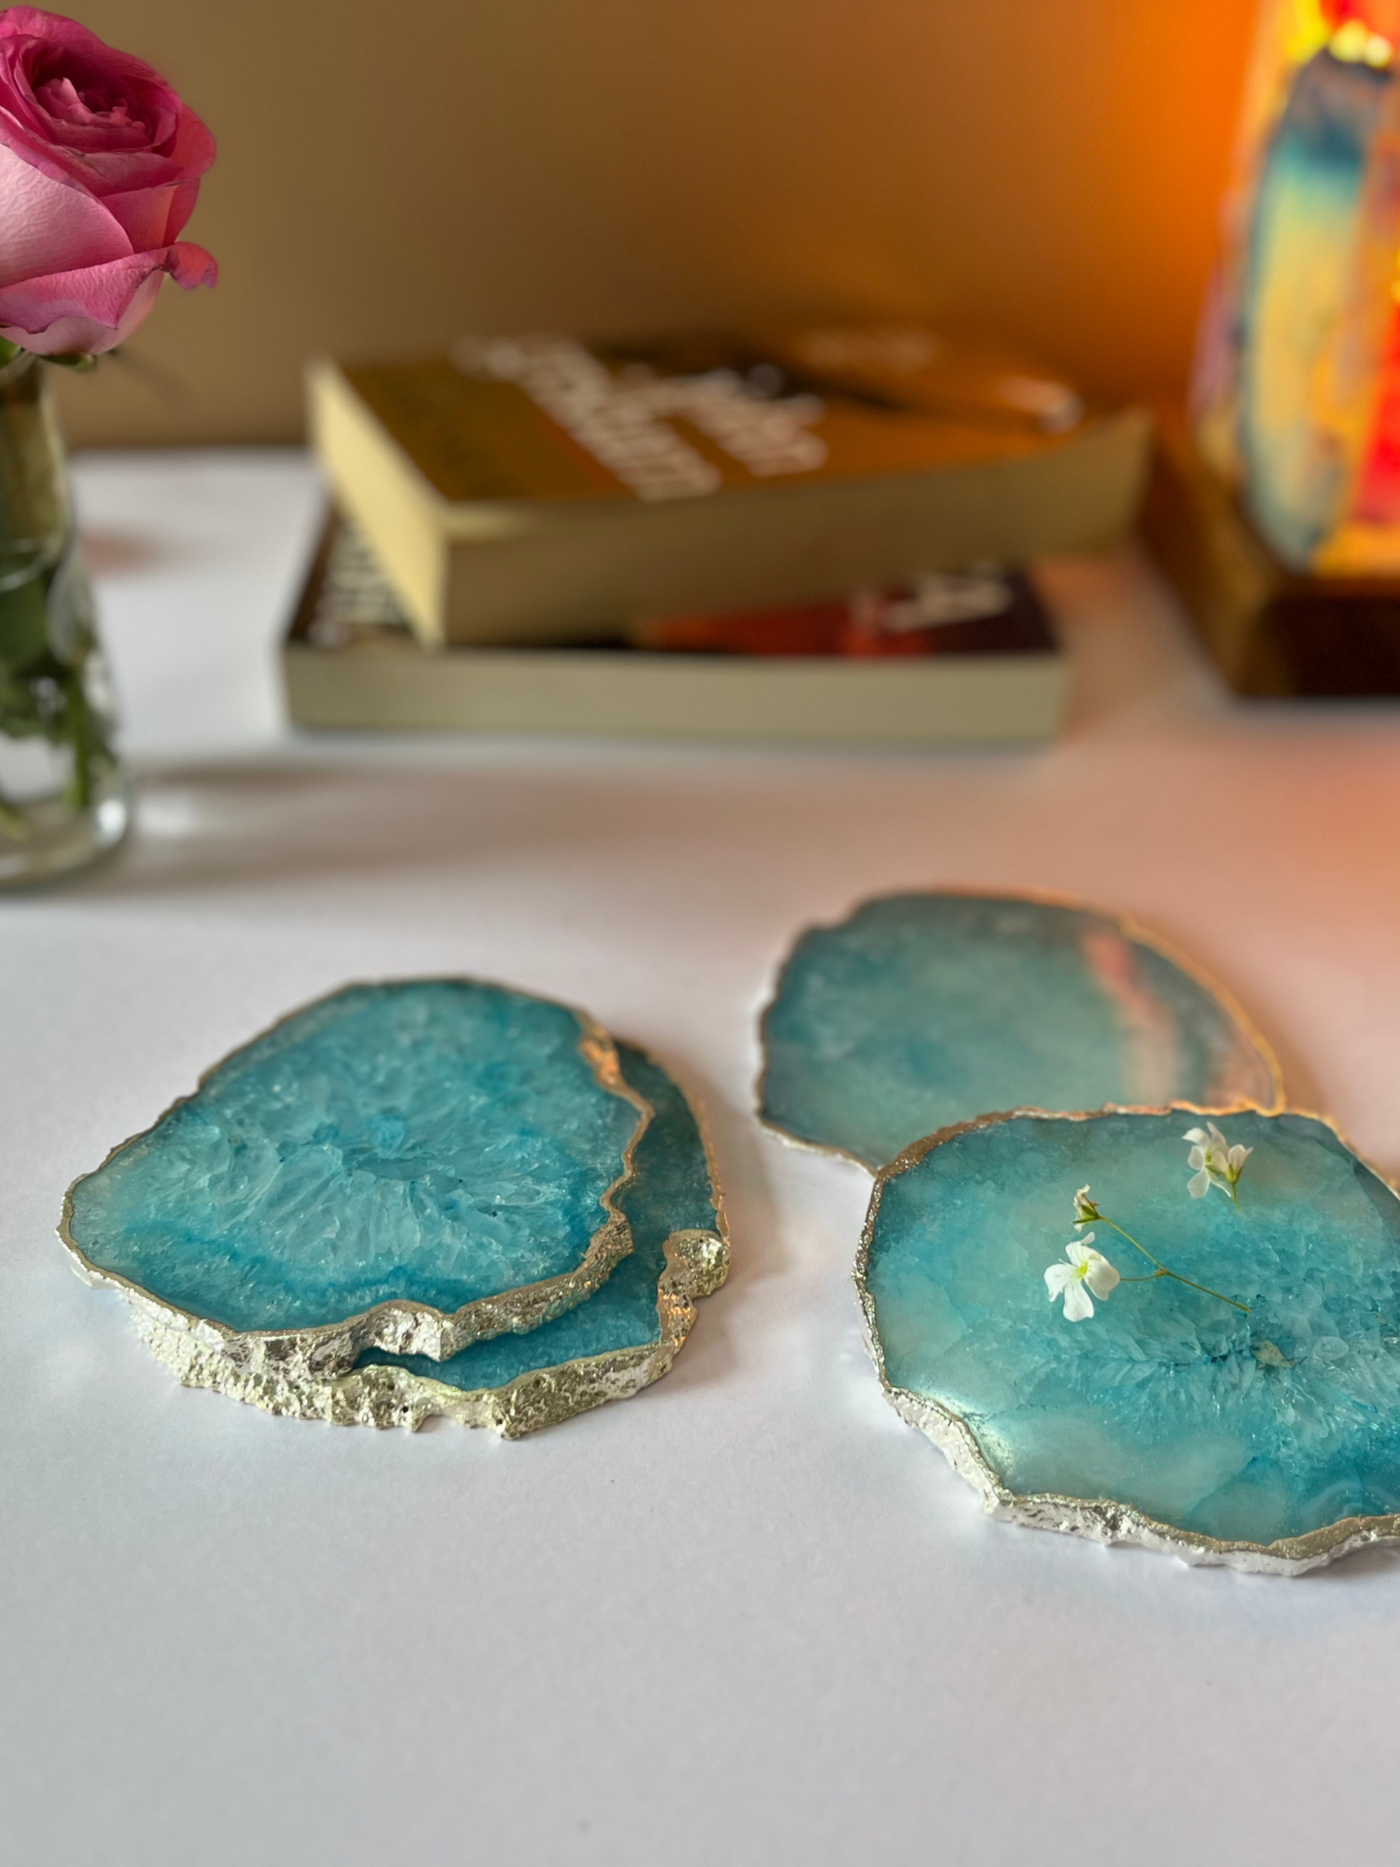 Silver Plated Coaster Set of 4 - Crystal Turquoise Agate